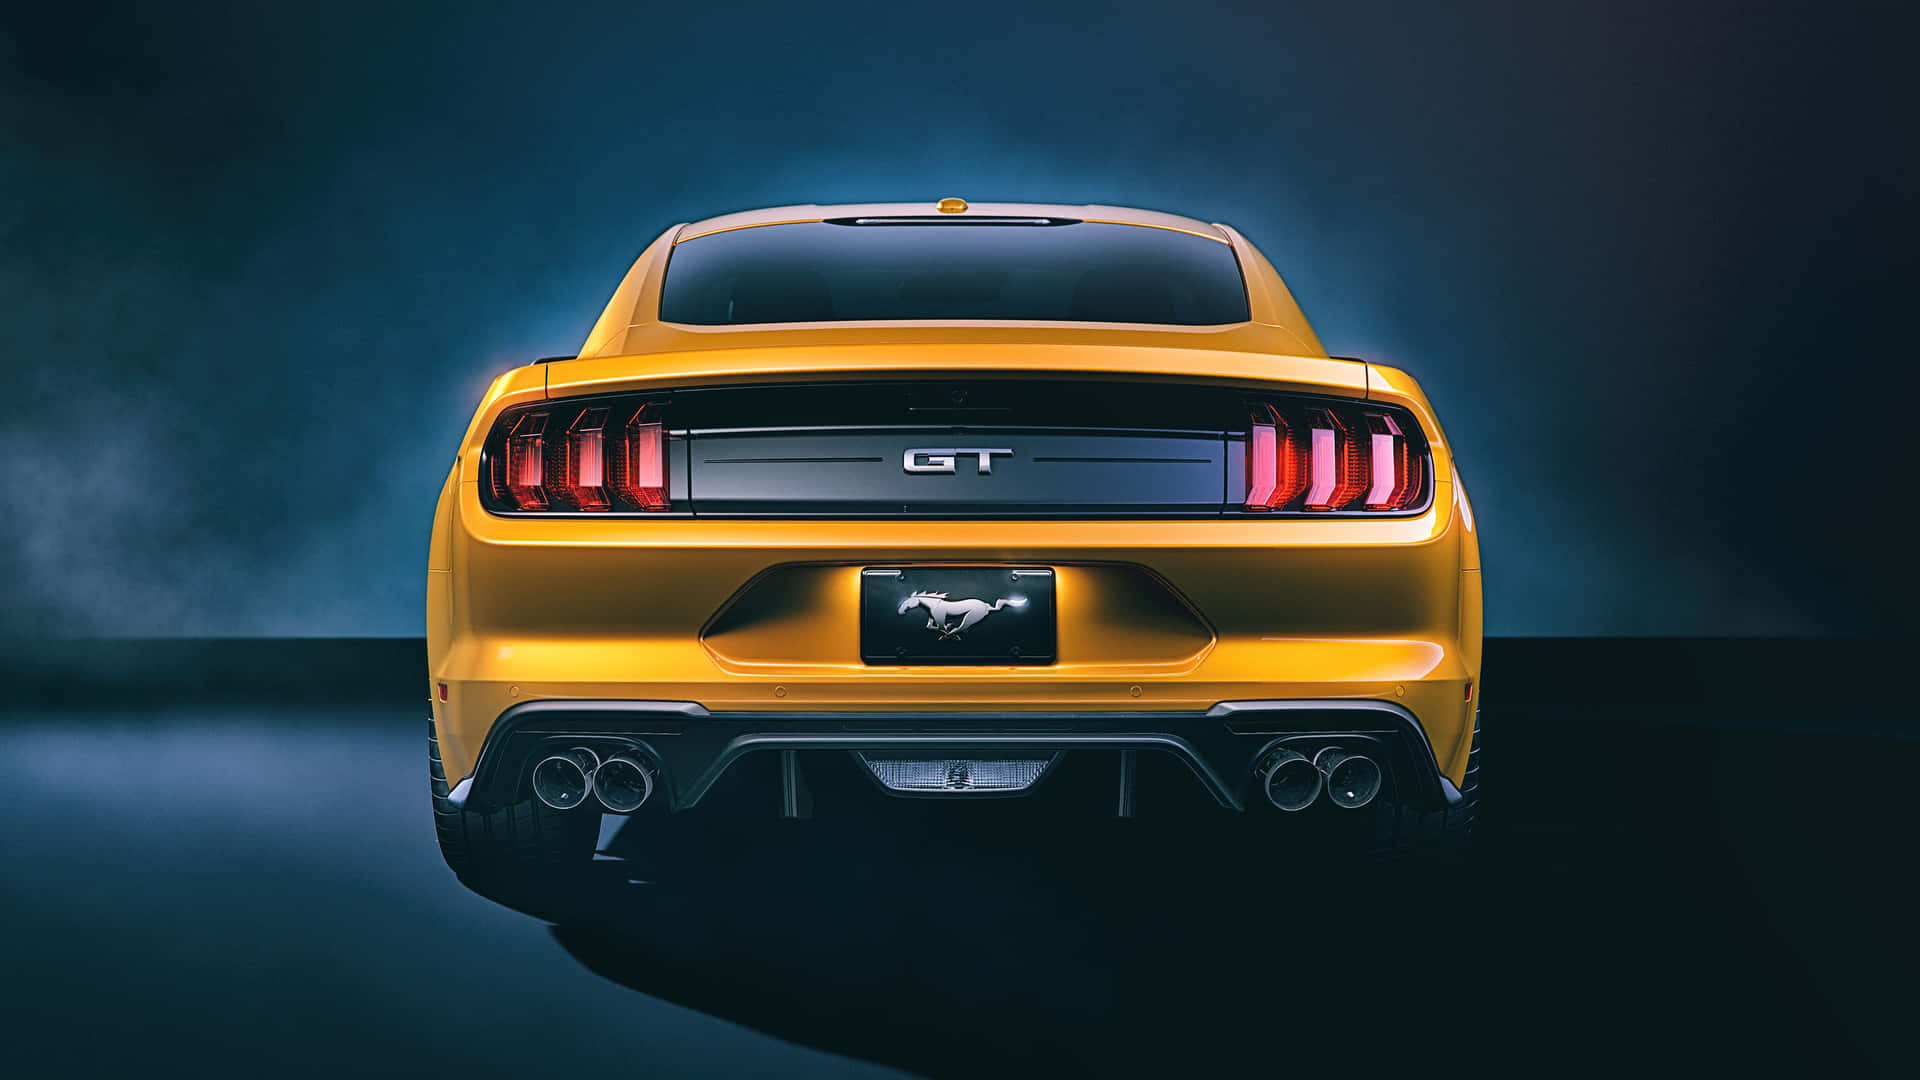 Rear View Of A Ford Mustang 2018 Gt Model Wallpaper